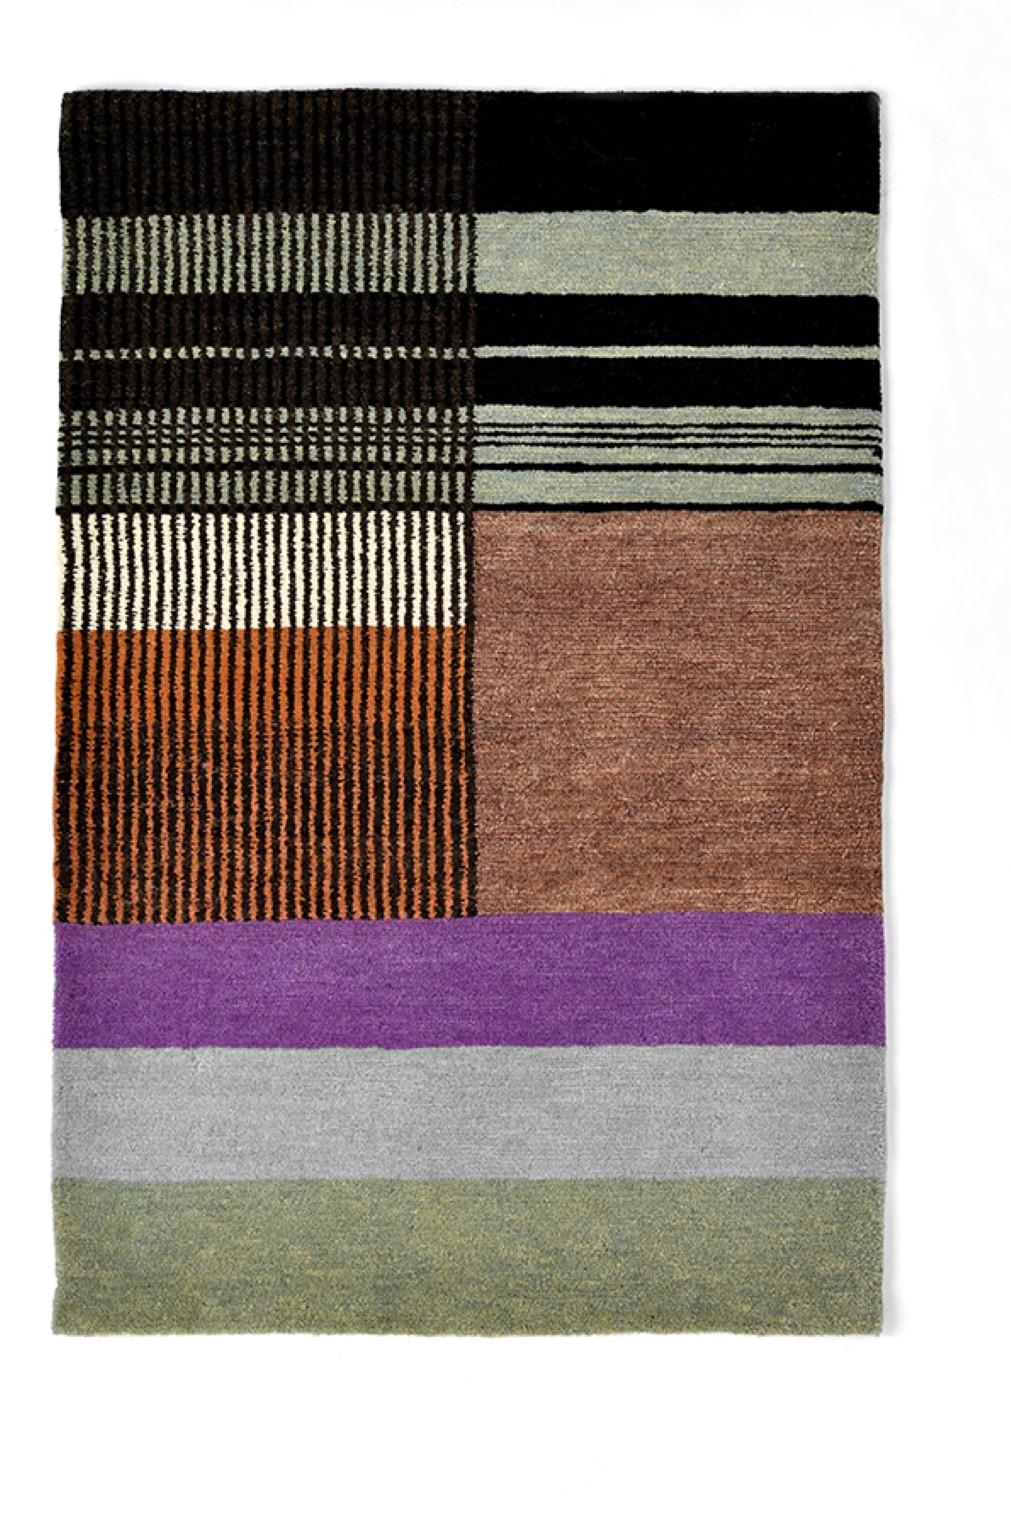 No. 233 hand-knotted textile poster by Lyk Carpet
Homage to the Bauhauswomen
Dimensions: W 56 x L 84 cm.
Materials: 100% tibetan highland-wool, new pure hand-combed and hand-spun wool, natural vegetable-dyed wool, 100 knots per square